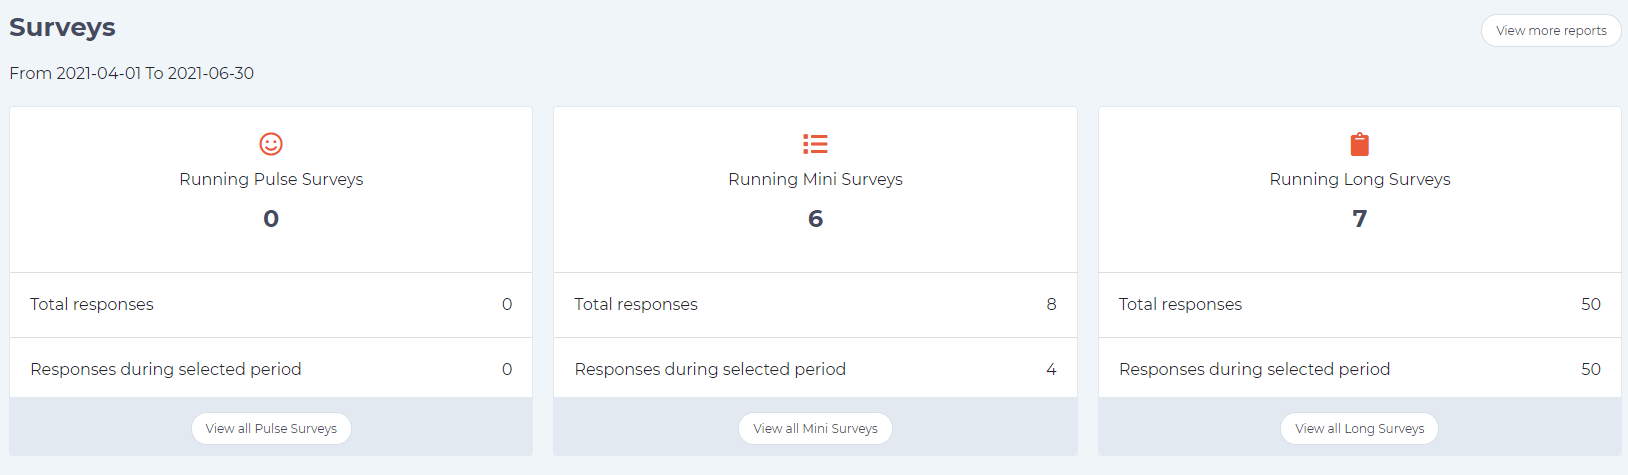 Dashboard showing overview of all survey types